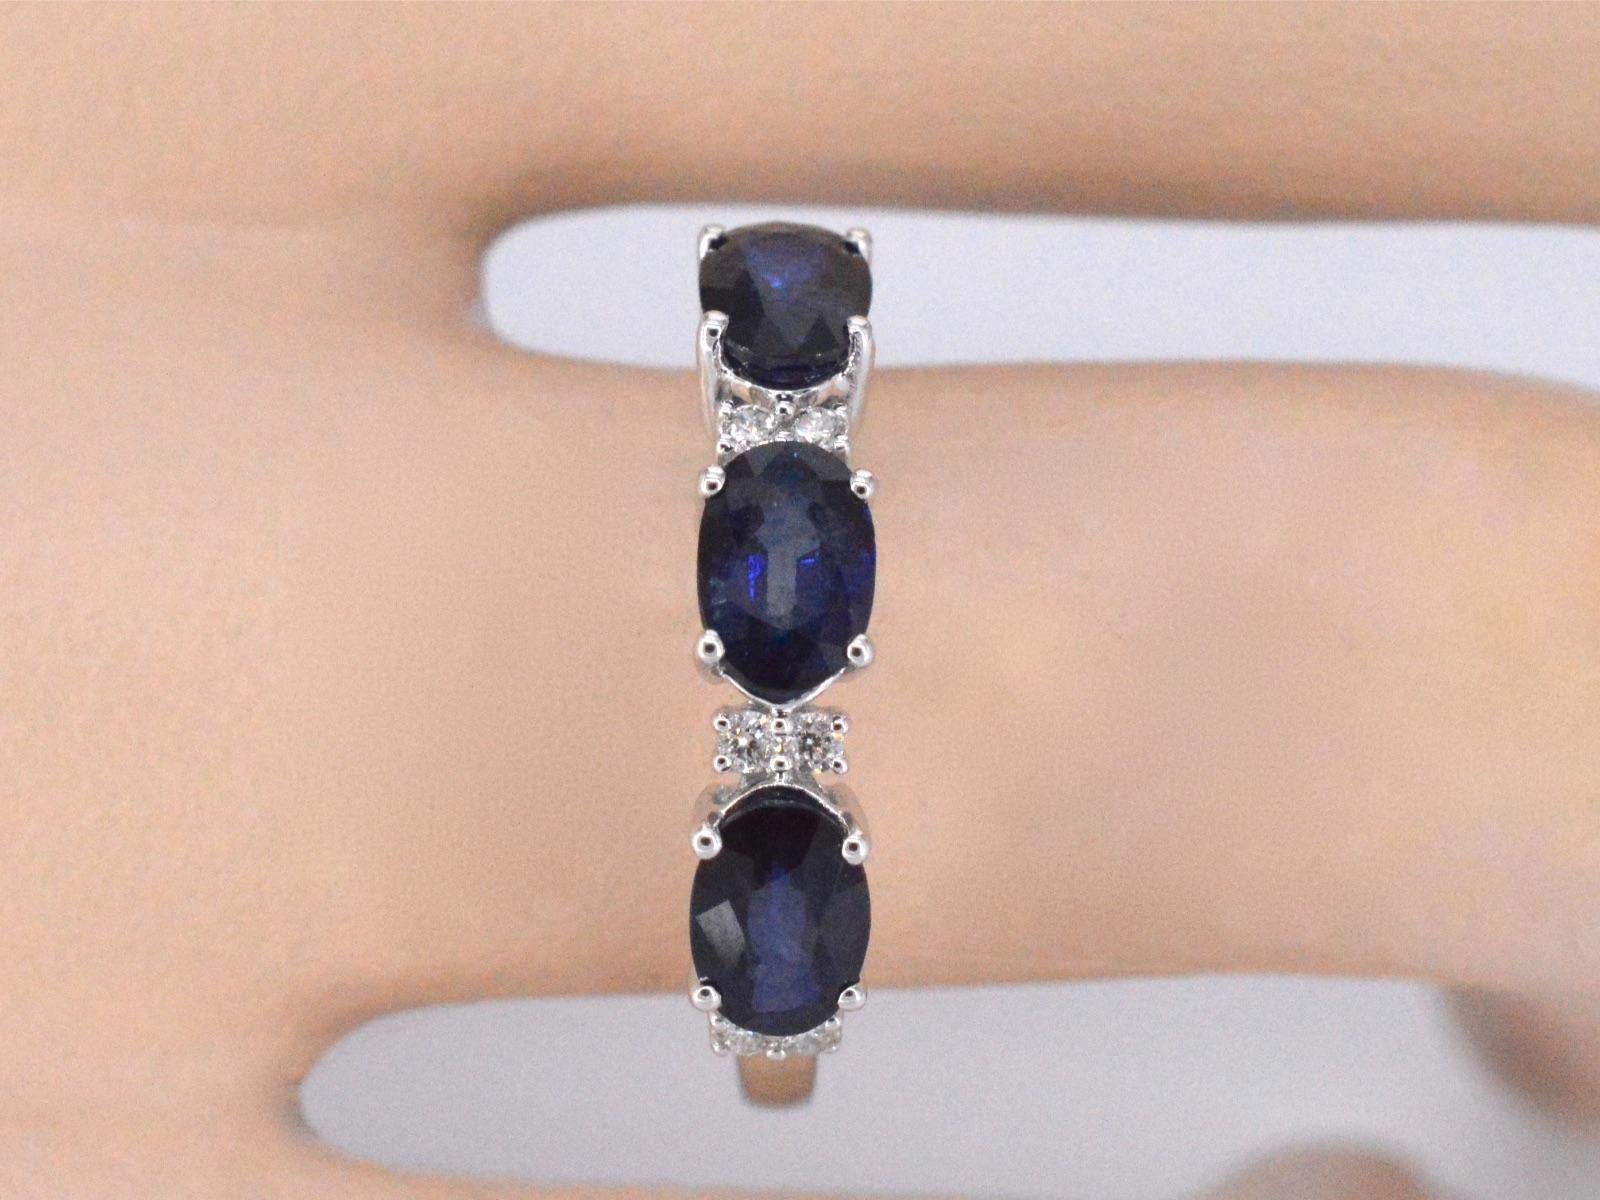 A white gold ring with diamonds and three oval cut sapphires is a striking piece of jewelry that exudes elegance and sophistication. The three oval sapphires are beautifully arranged in a row, each accentuated by diamonds on either side, creating a